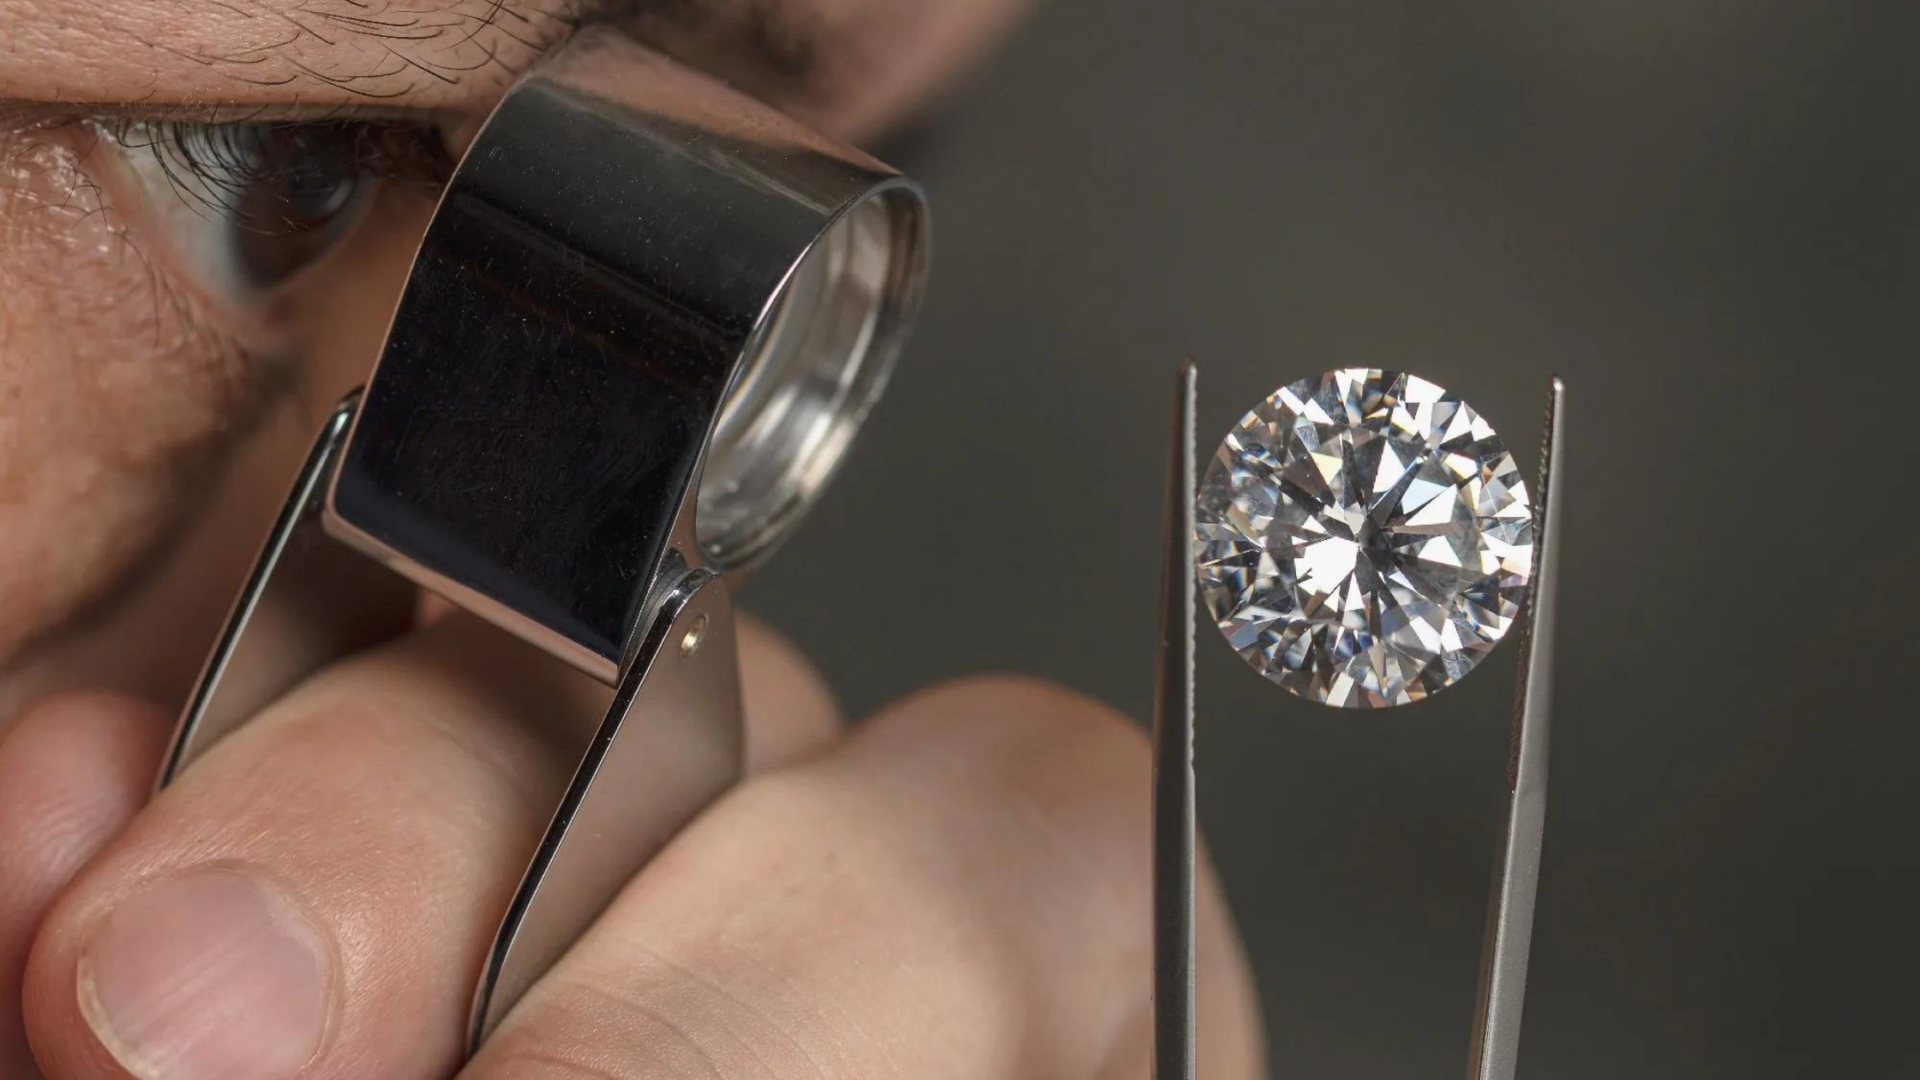 Testing Natural and Lab Diamonds with a Diamond Tester Pen - Does